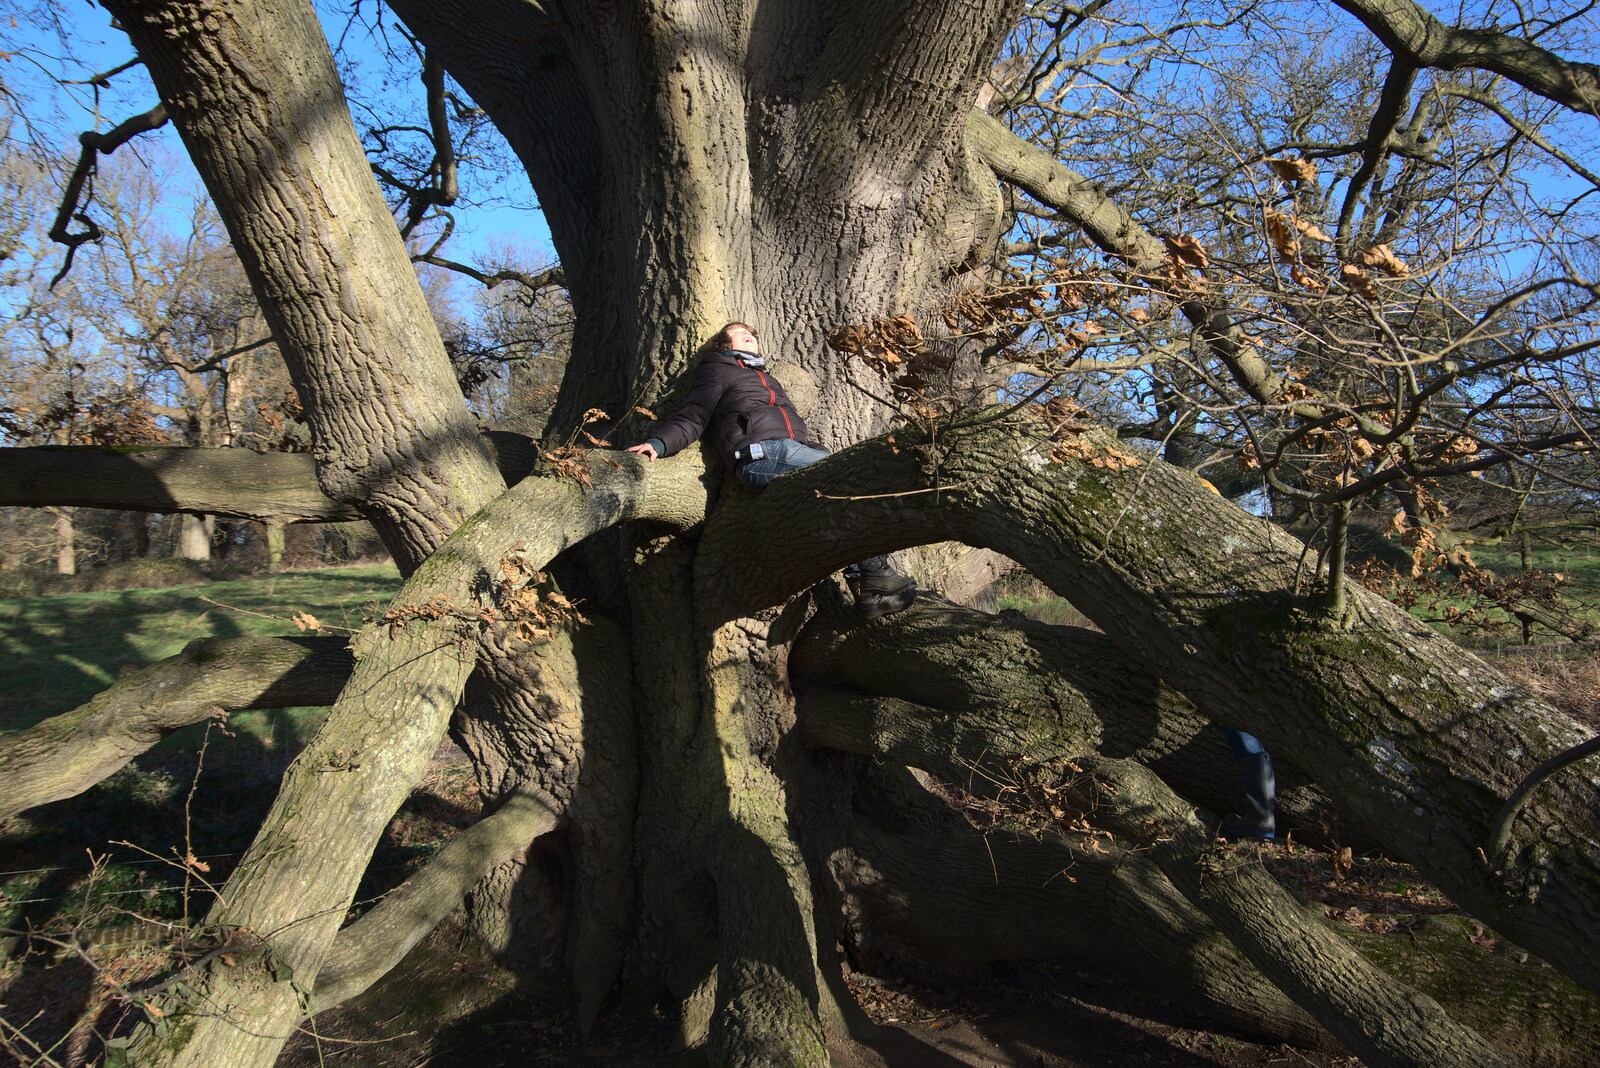 Fred's up a tree from A Visit to Blickling Hall, Aylsham, Norfolk - 9th January 2022